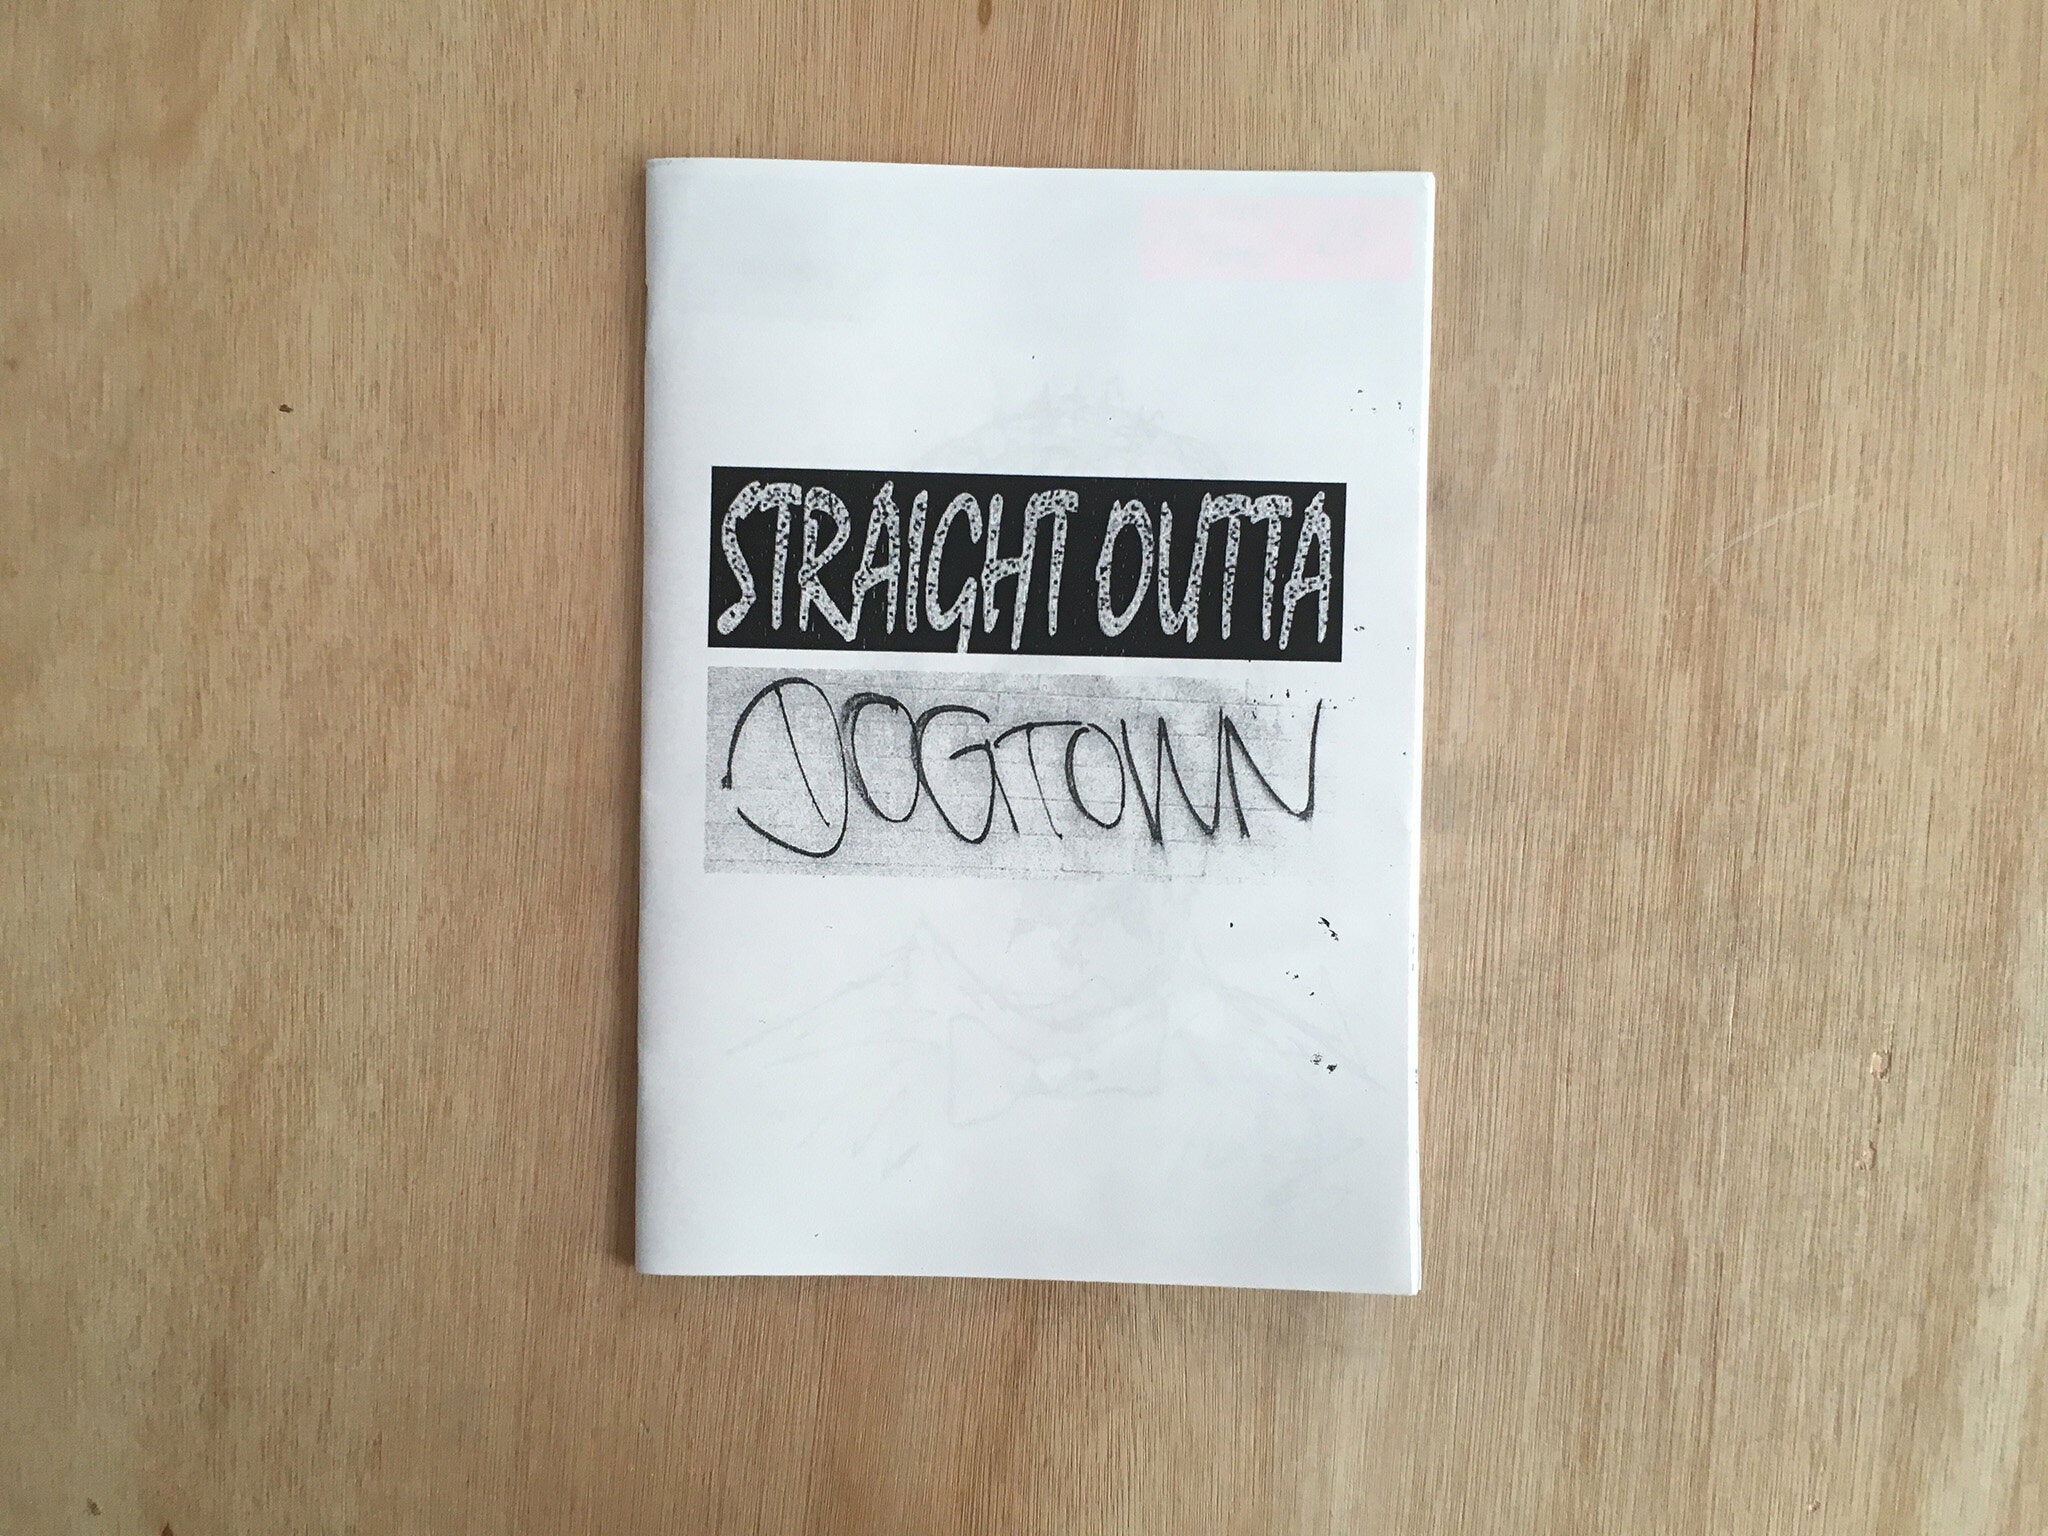 STRAIGHT OUTTA DOGTOWN by David Sherry & Owen Piper